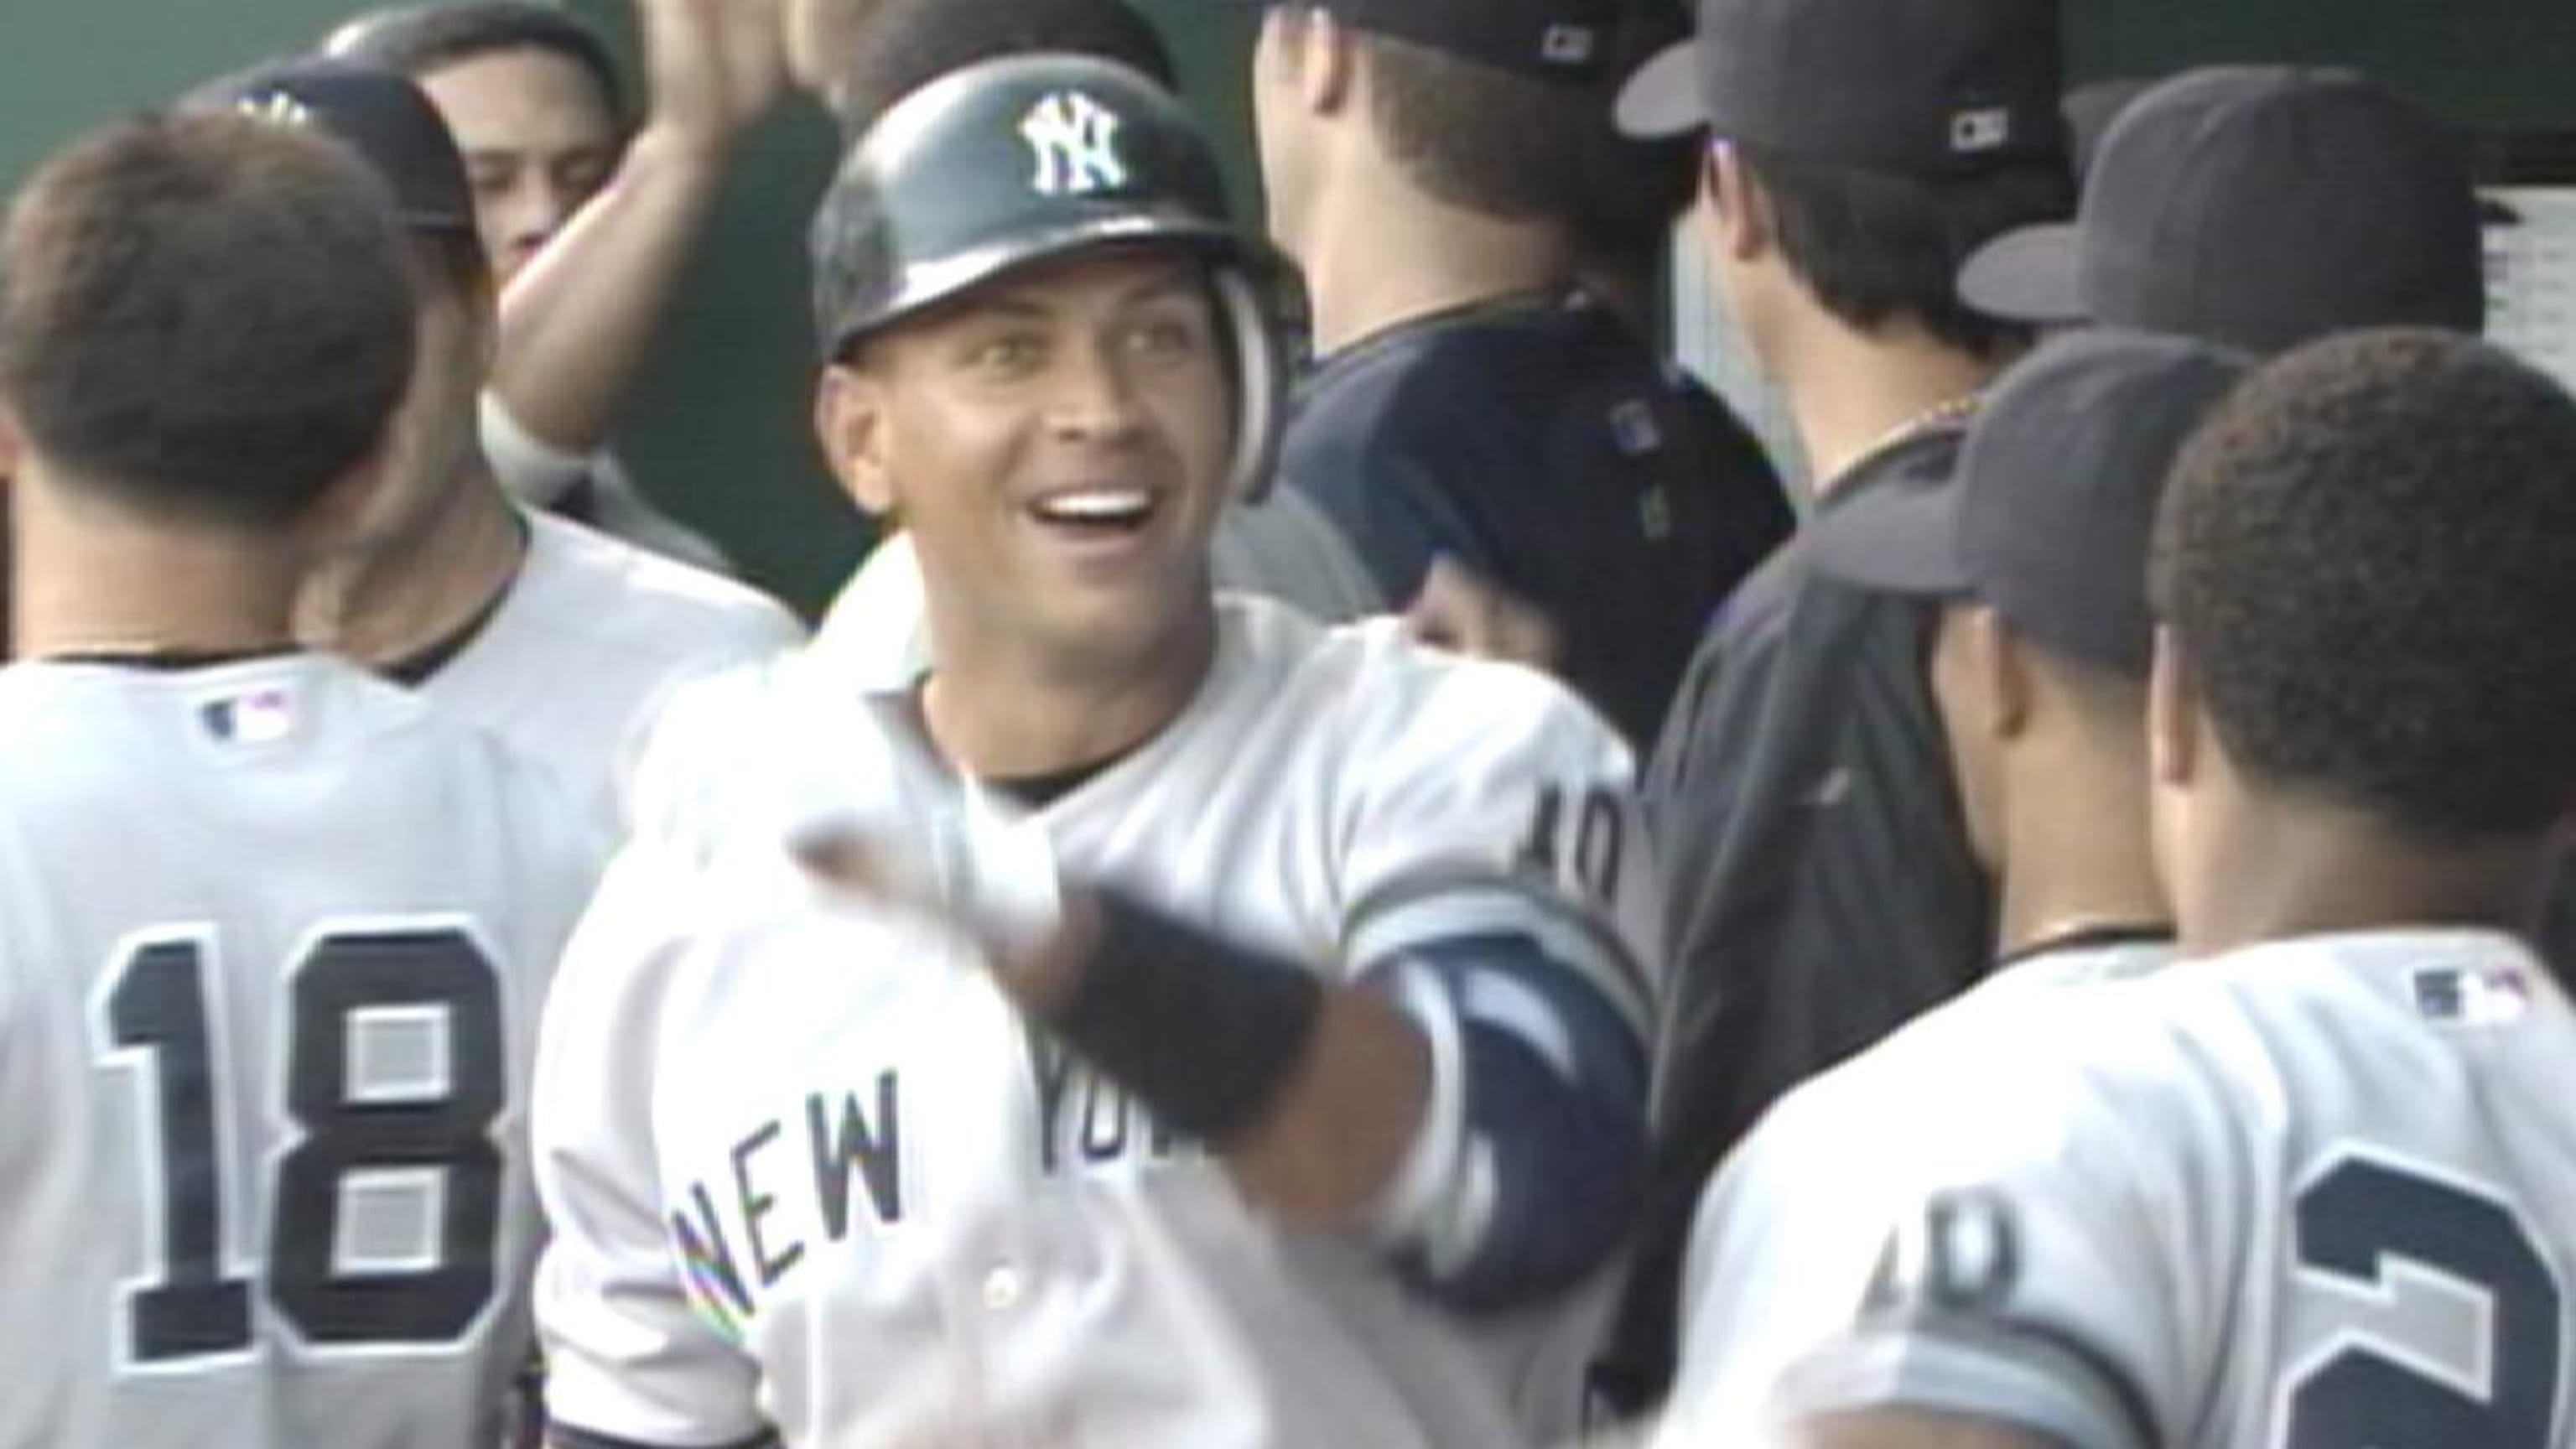 A-Rod's 50th home run of 2007